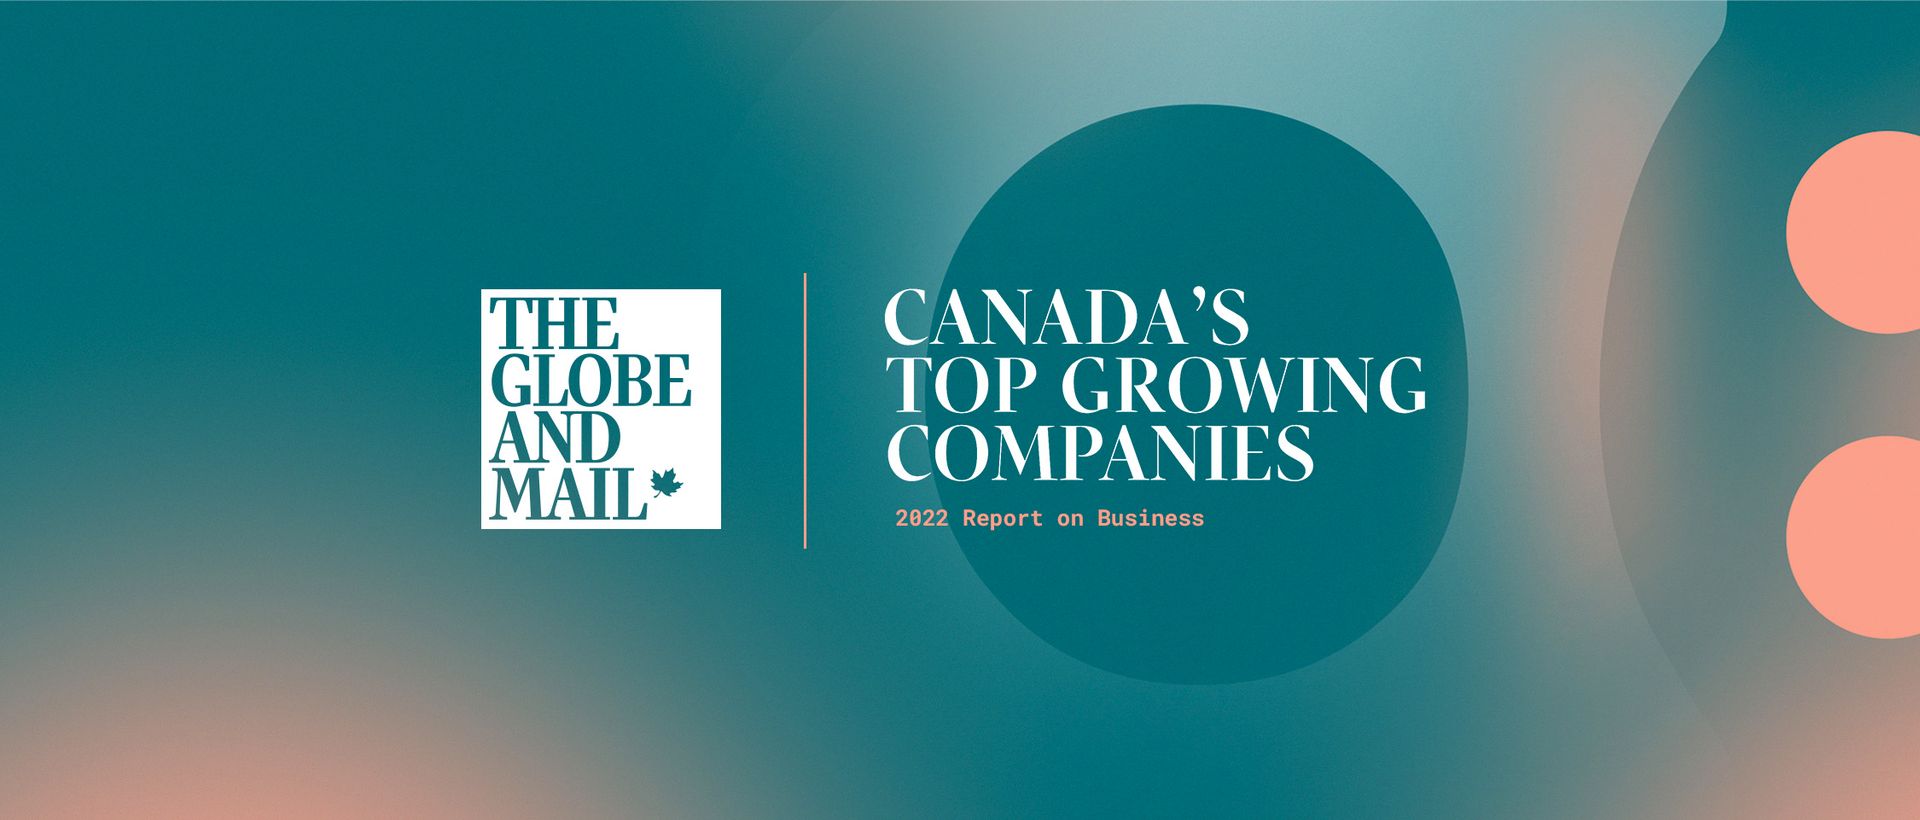 Logo du concours Canada's Top Growing Companies du Globe and Mail